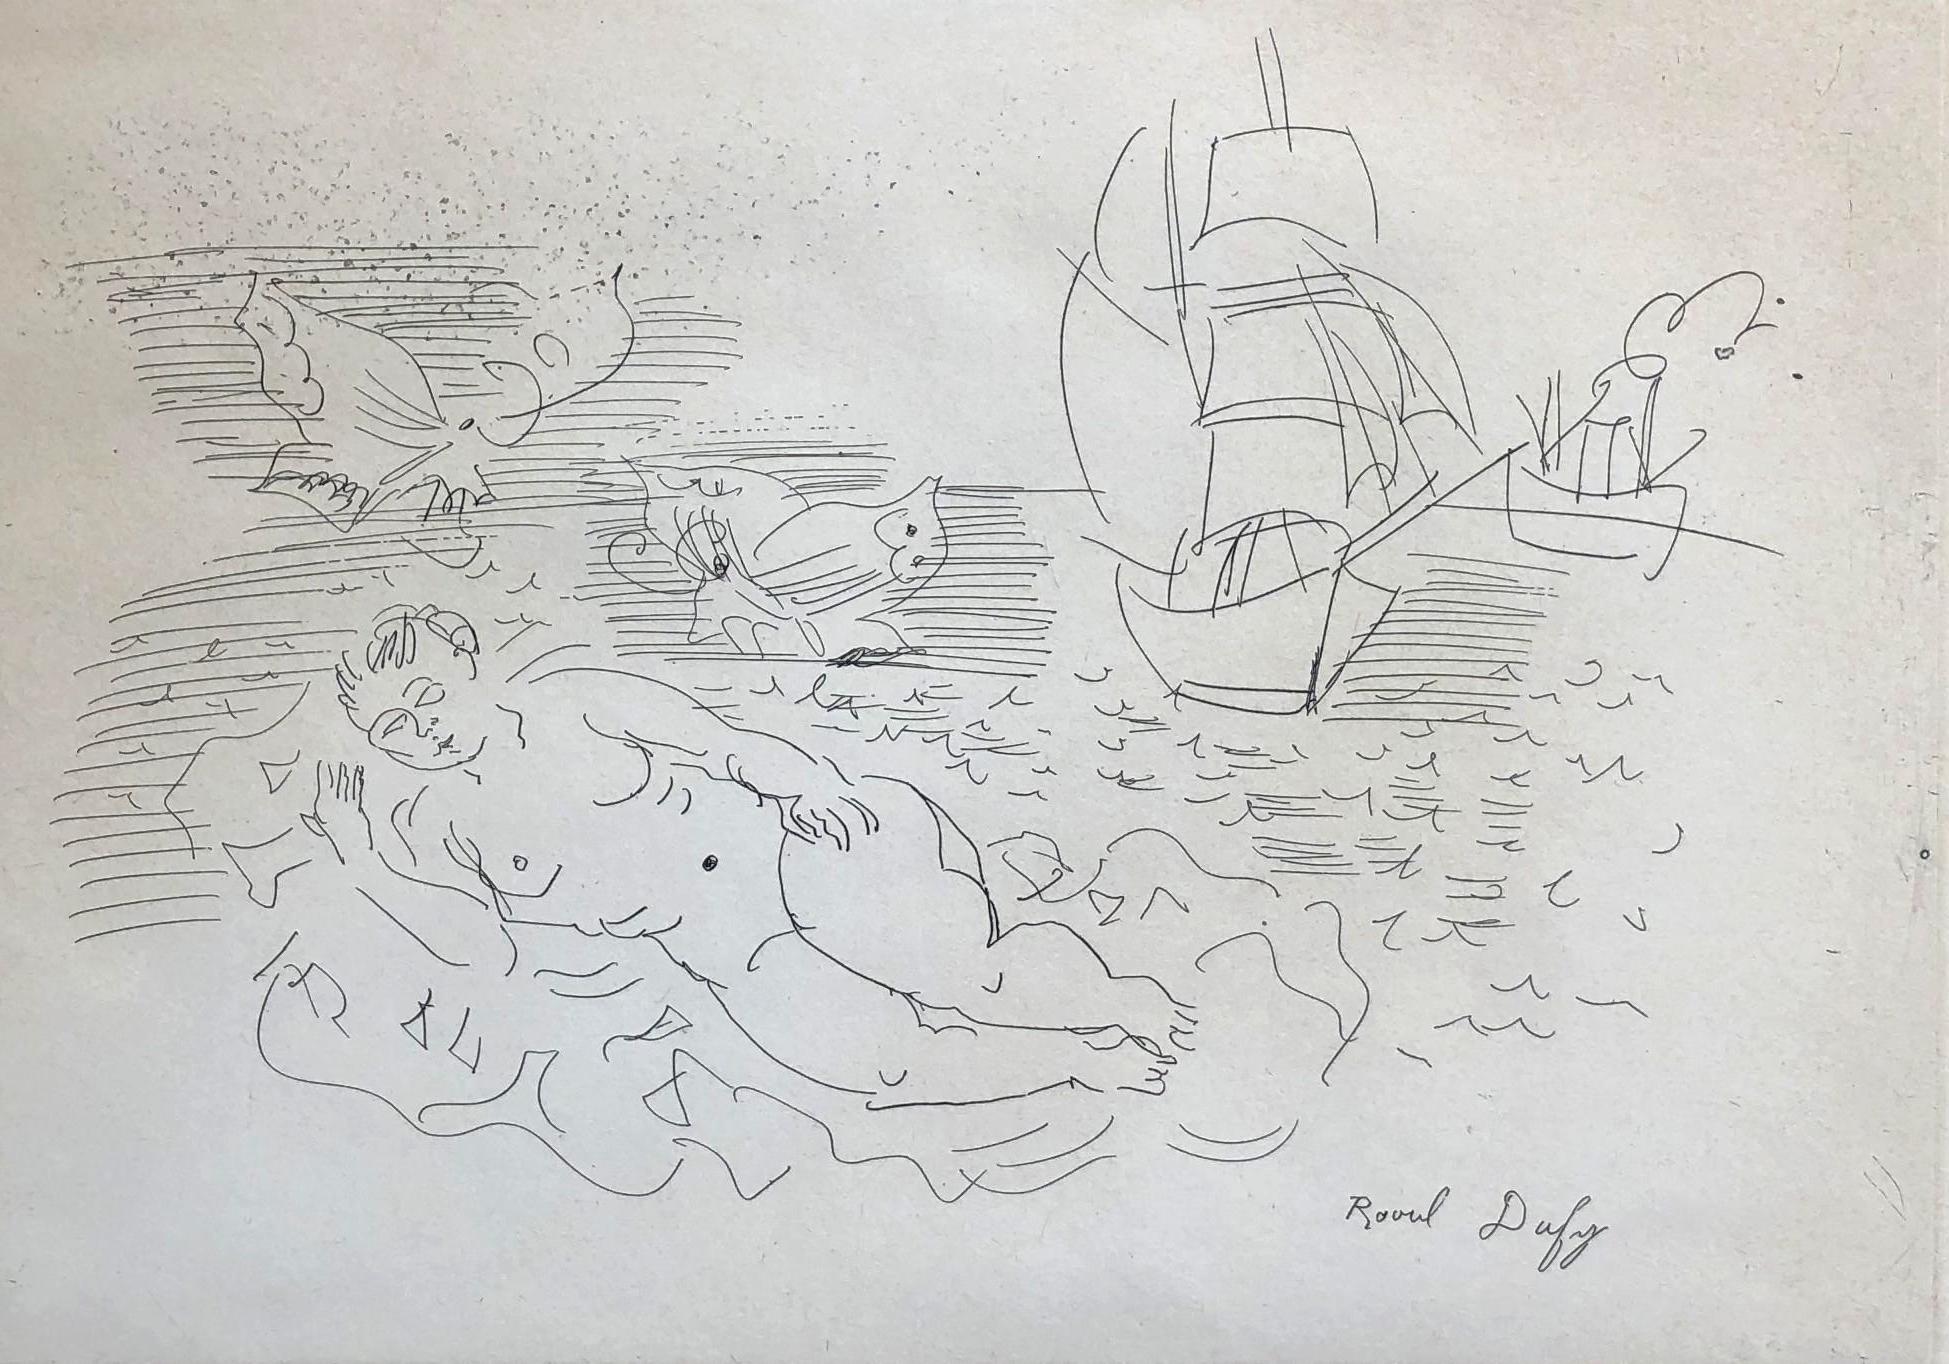 Raoul Dufy Portrait Print - The Bather on the Beach - Original Etching - Signed in the Plate